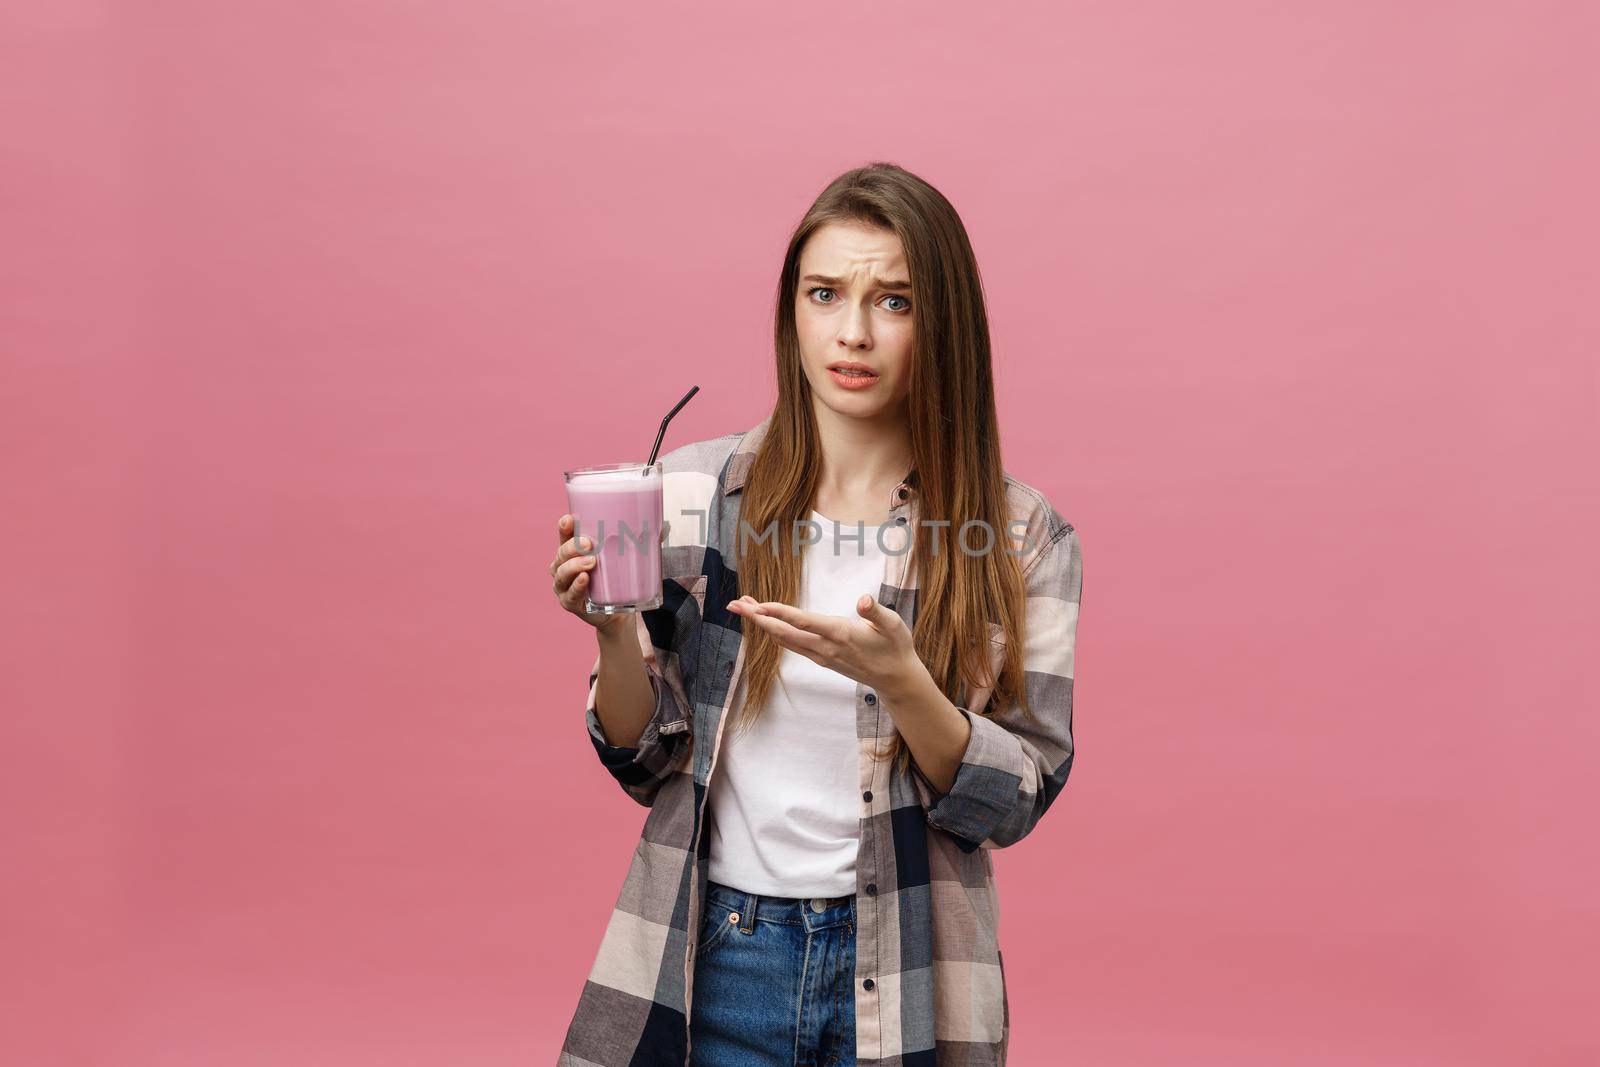 Disappointed young woman drinking smoothie juice. Isolated portrait